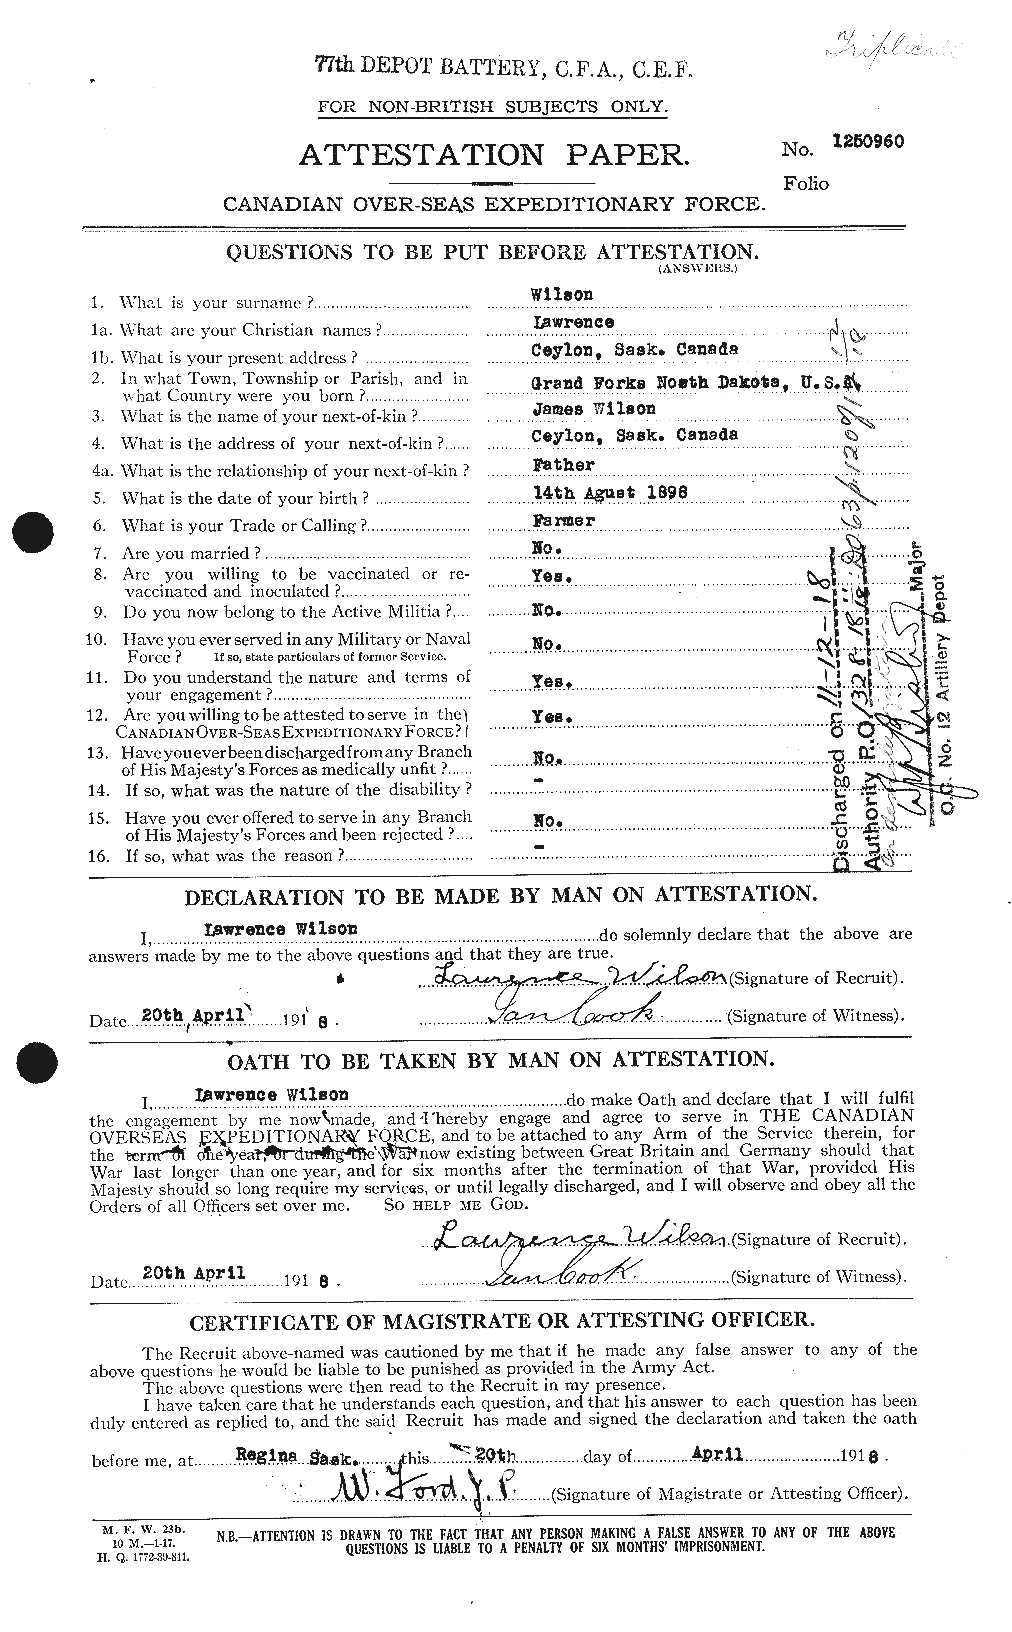 Personnel Records of the First World War - CEF 678620a